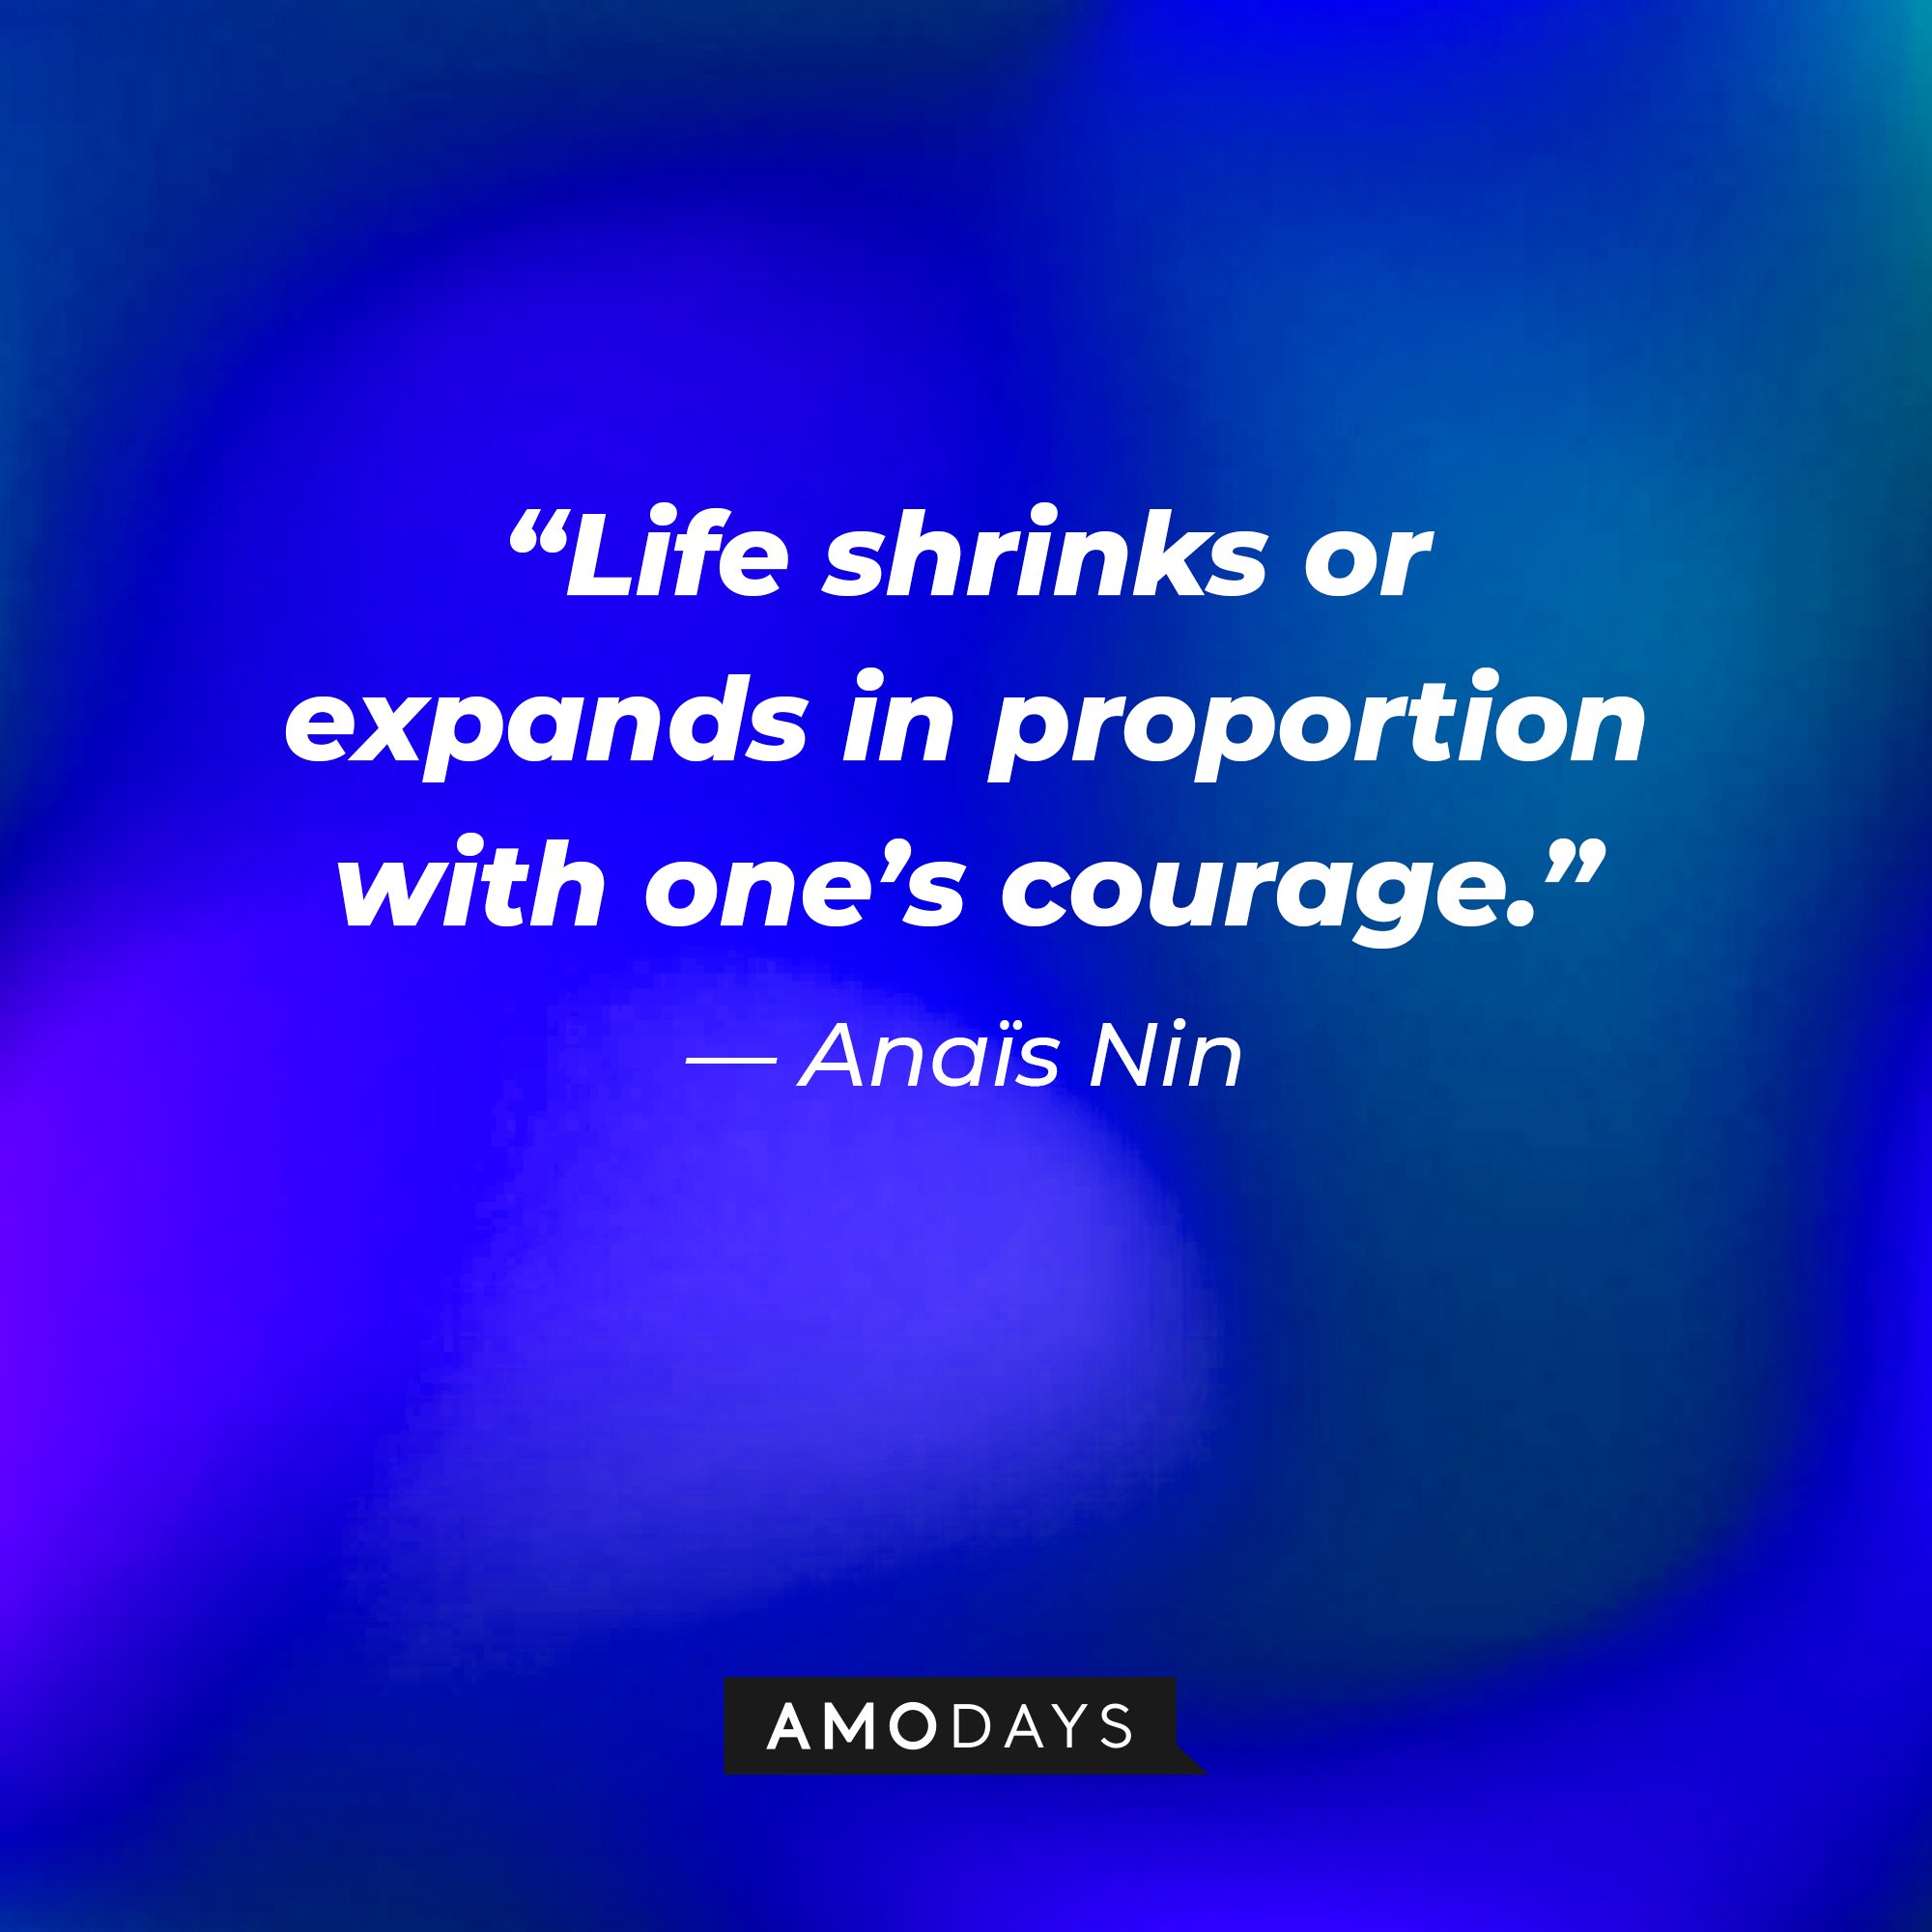 Anaïs Nin’s quote: “Life shrinks or expands in proportion with one’s courage.” | Image: AmoDays